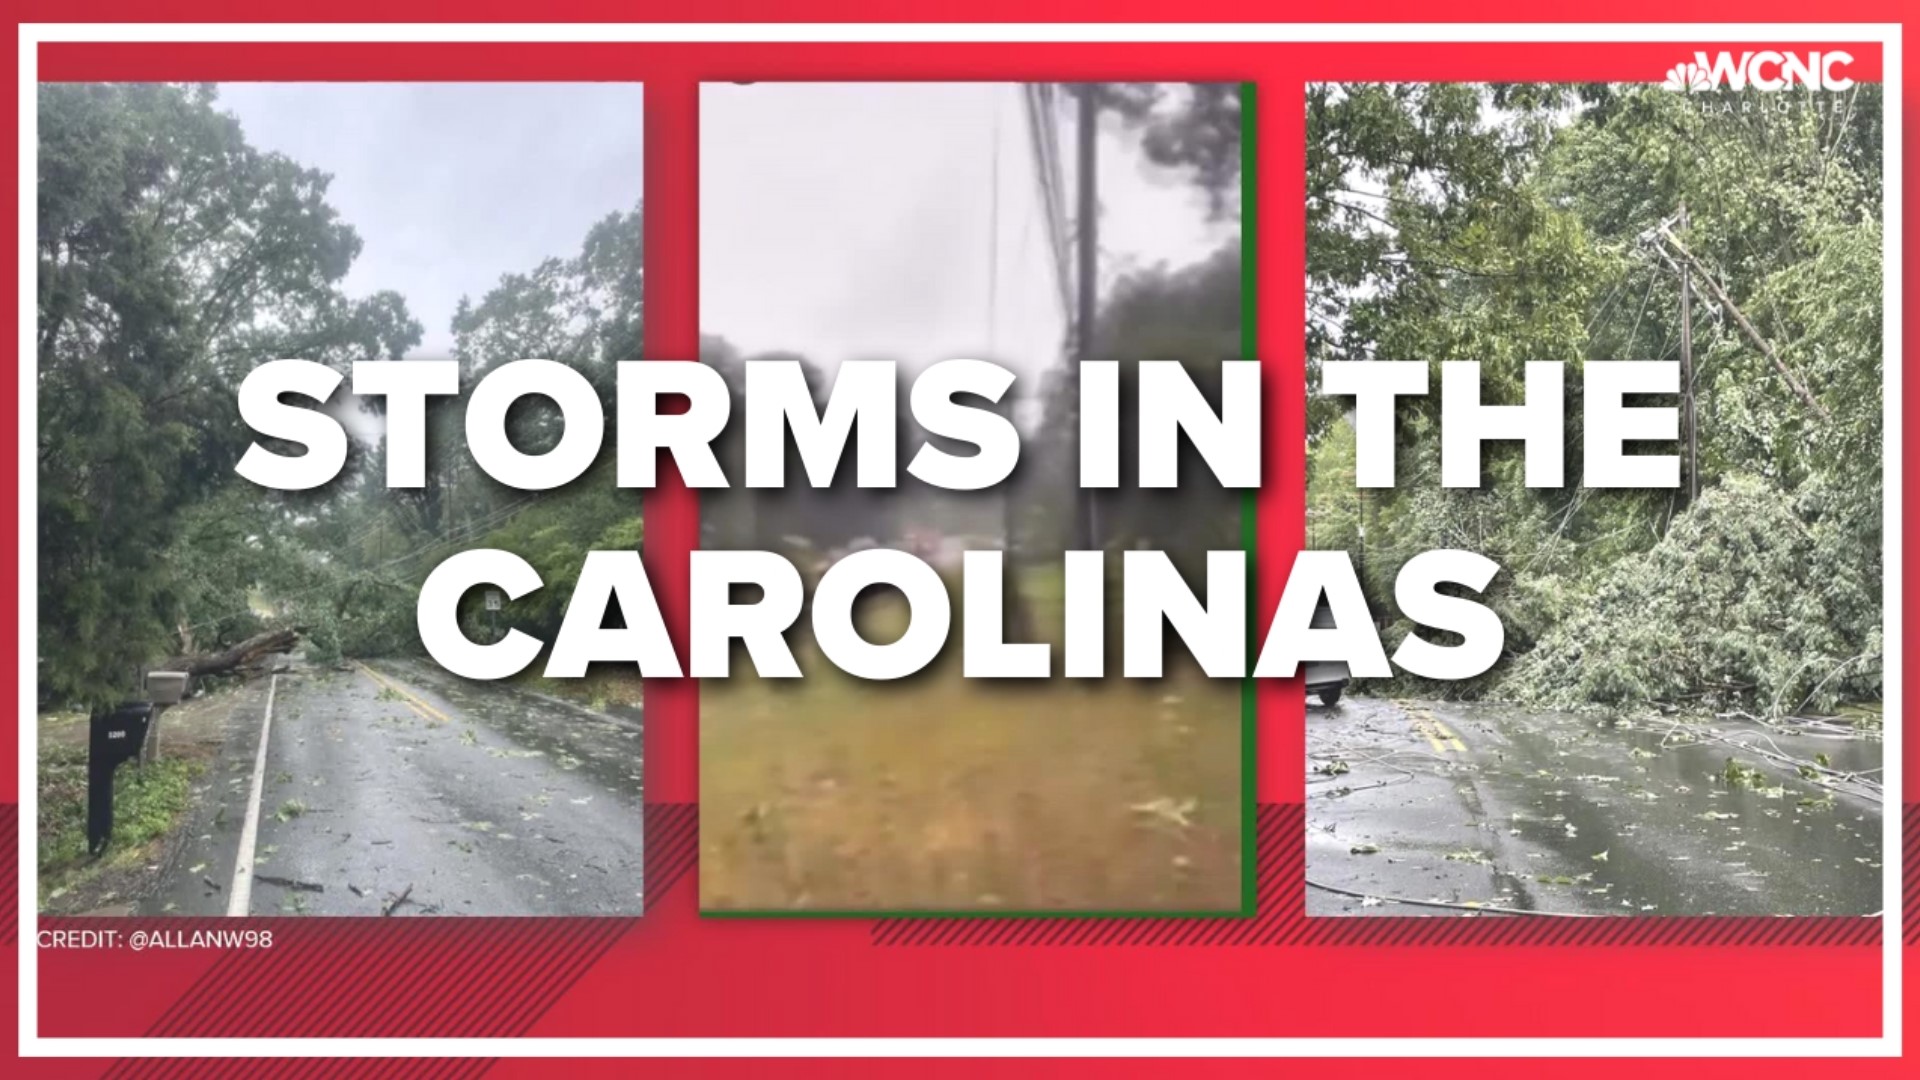 Several Charlotte-area counties got storm warnings Monday afternoon, including Cabarrus and Rowan counties.